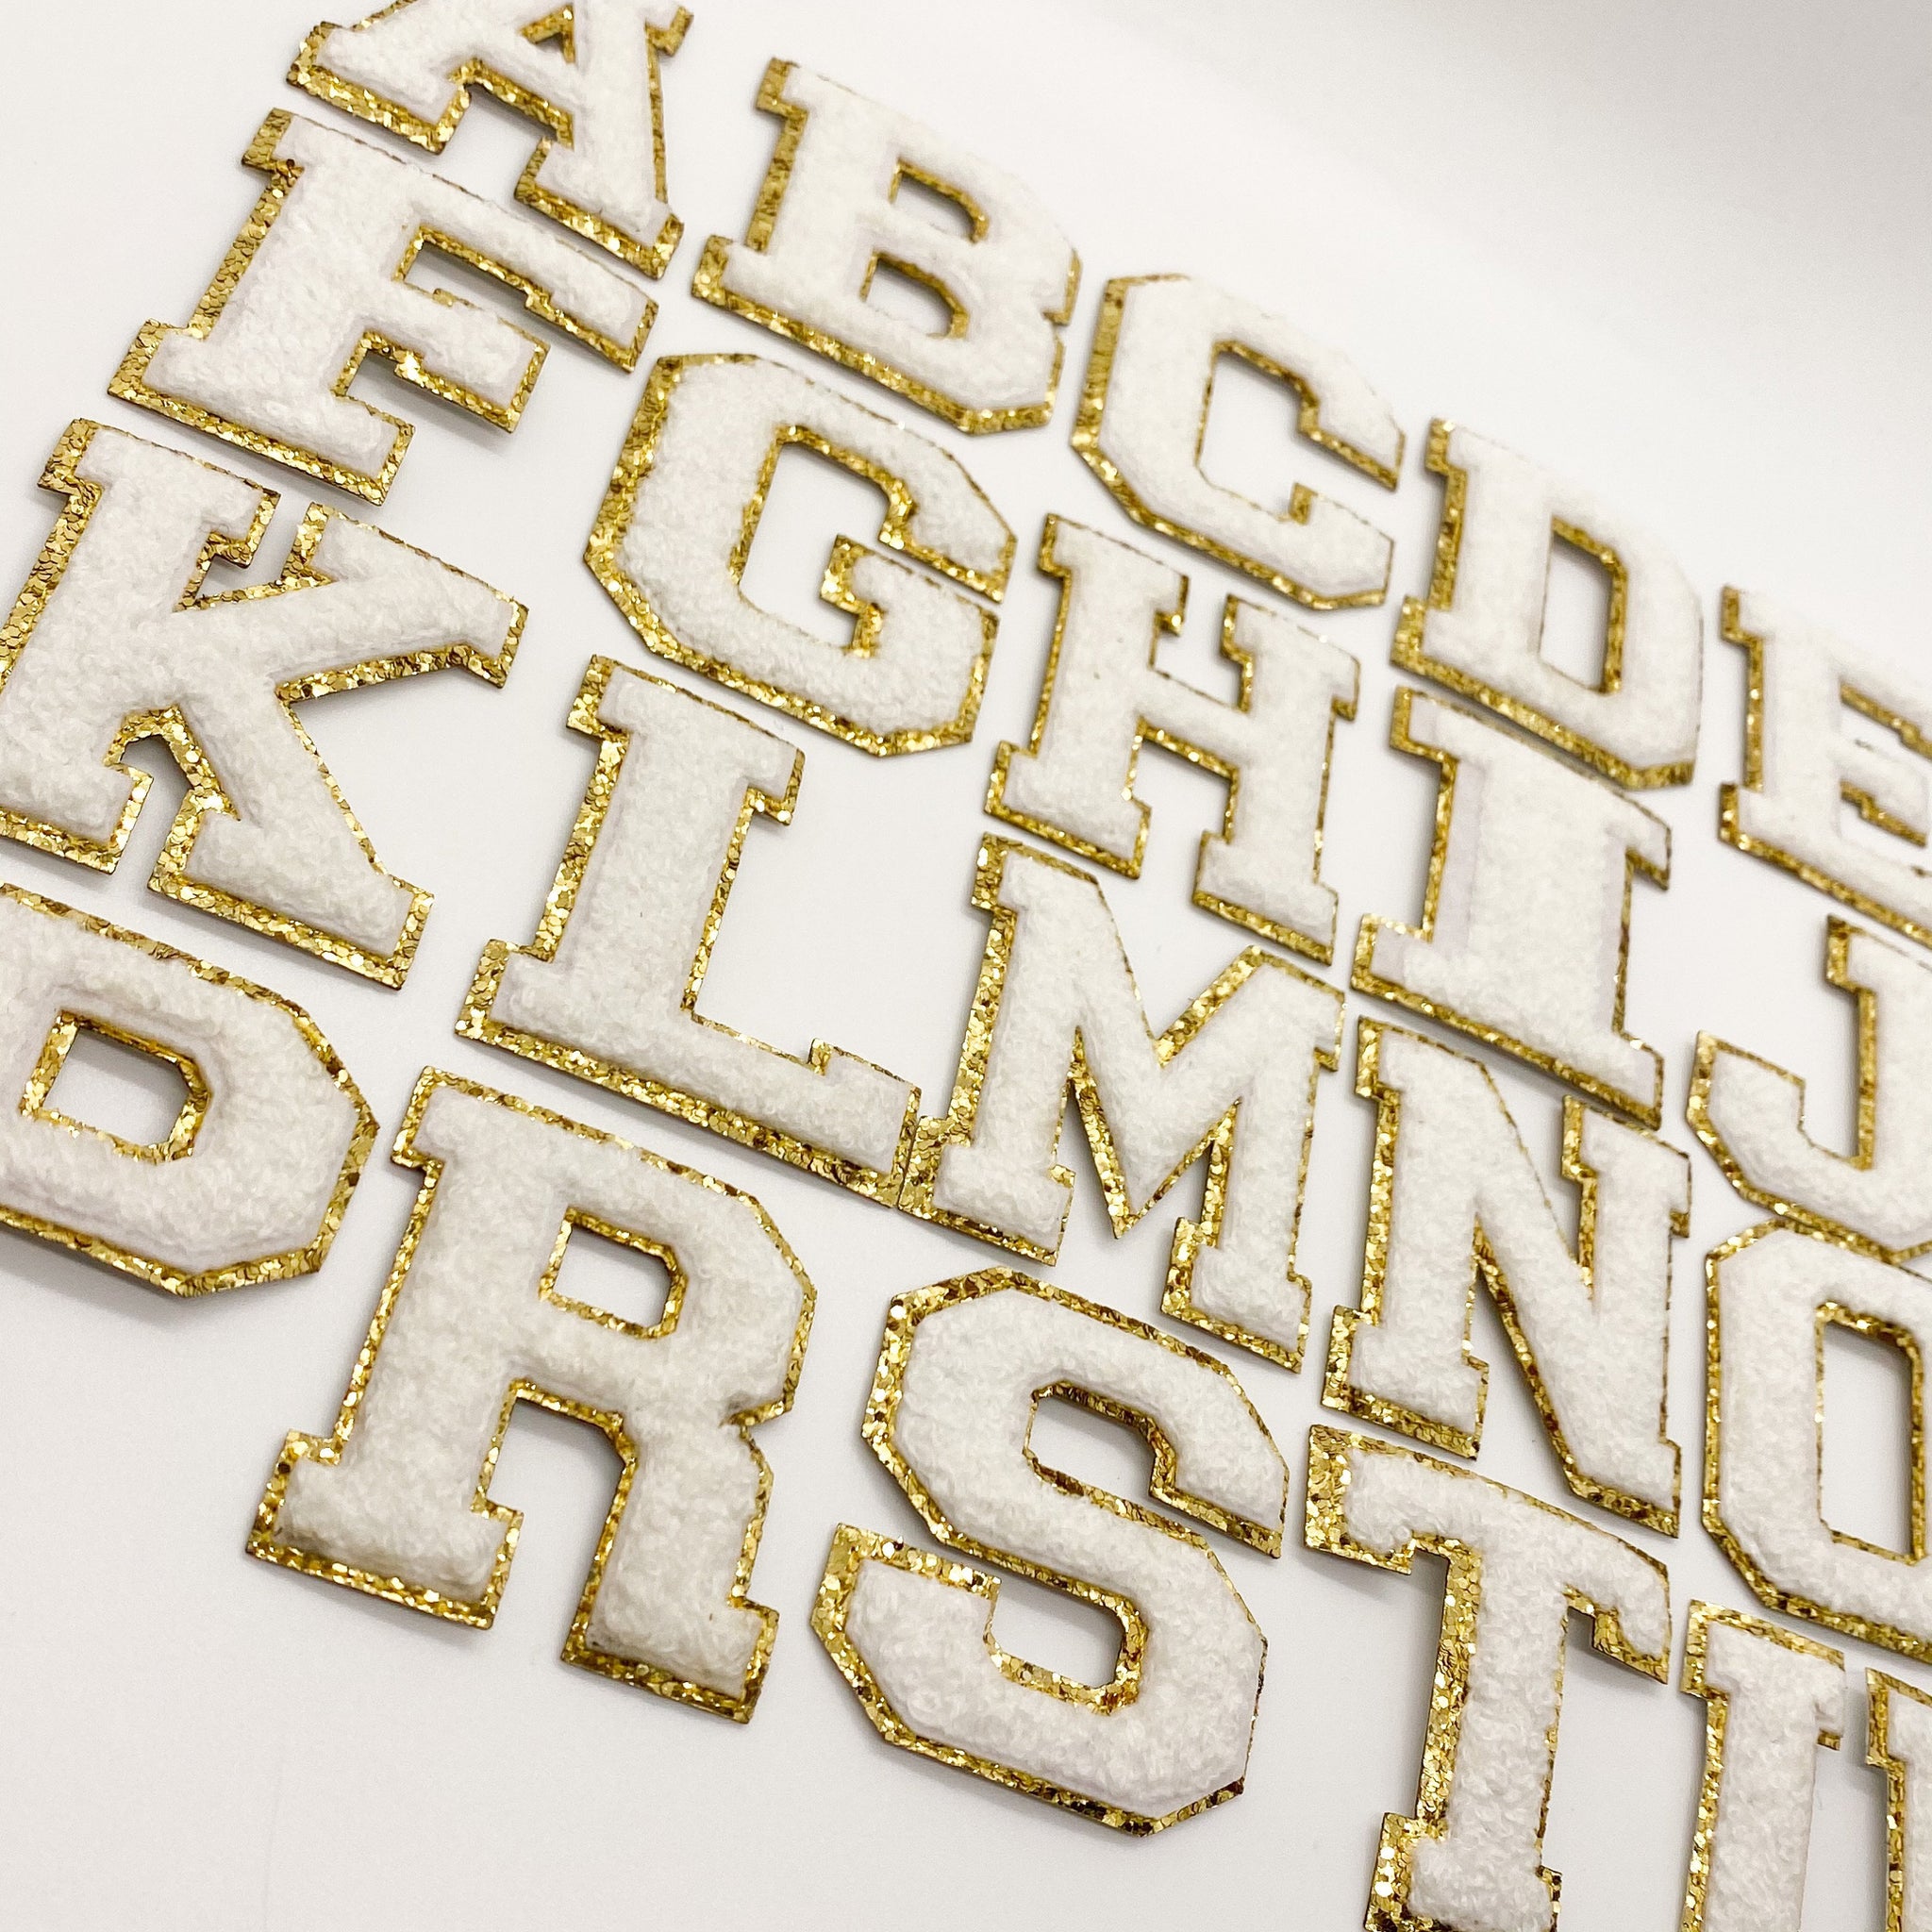 DIY 3-Inch Iron-On Letters in Gold Glitter  Iron on letters, Gold glitter,  Glitter letters